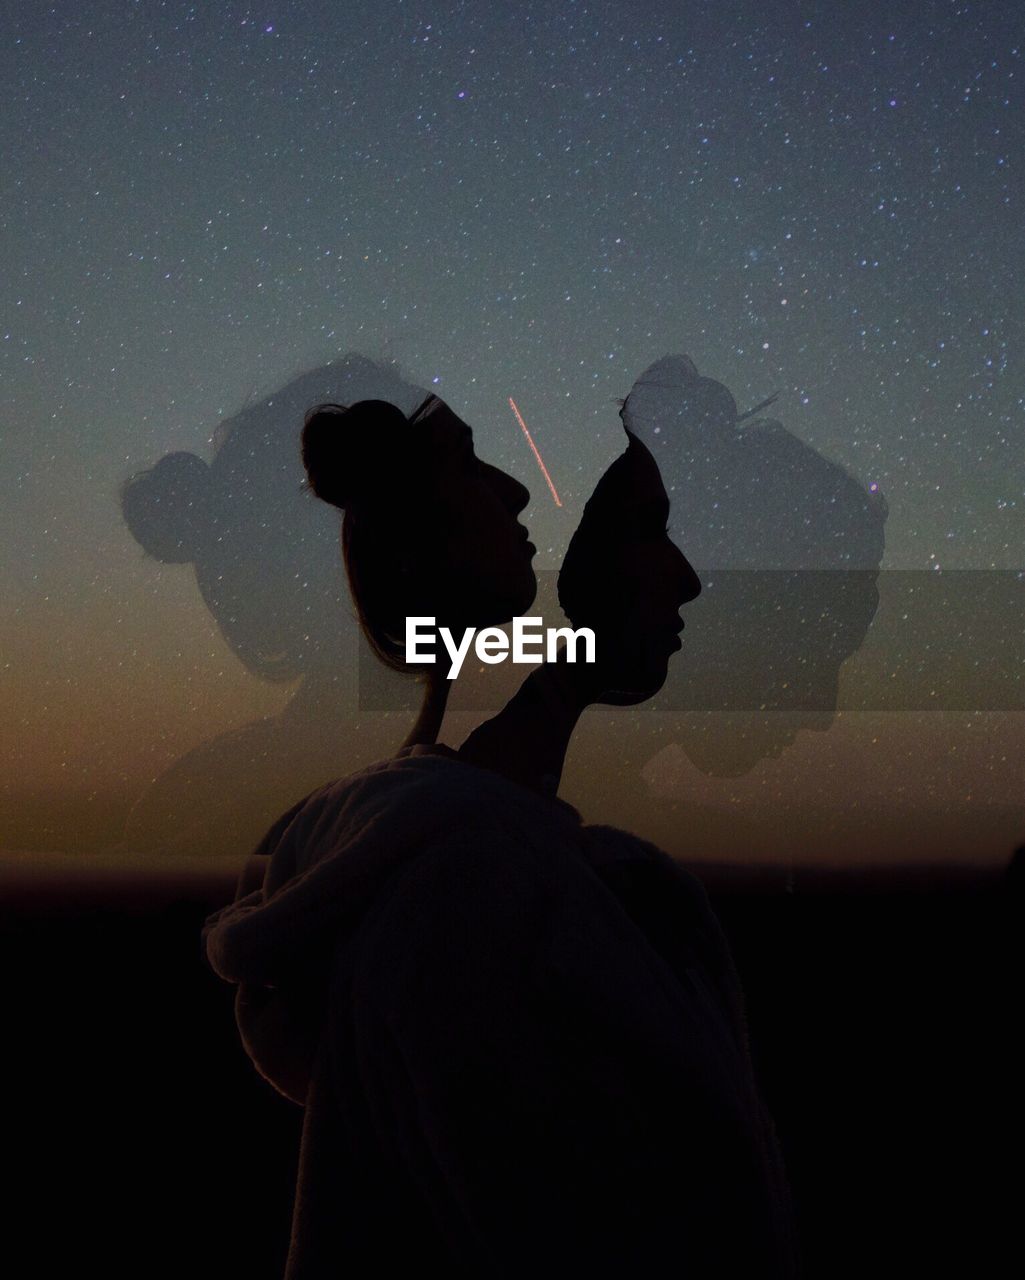 Multiple image of silhouette woman against star field at night